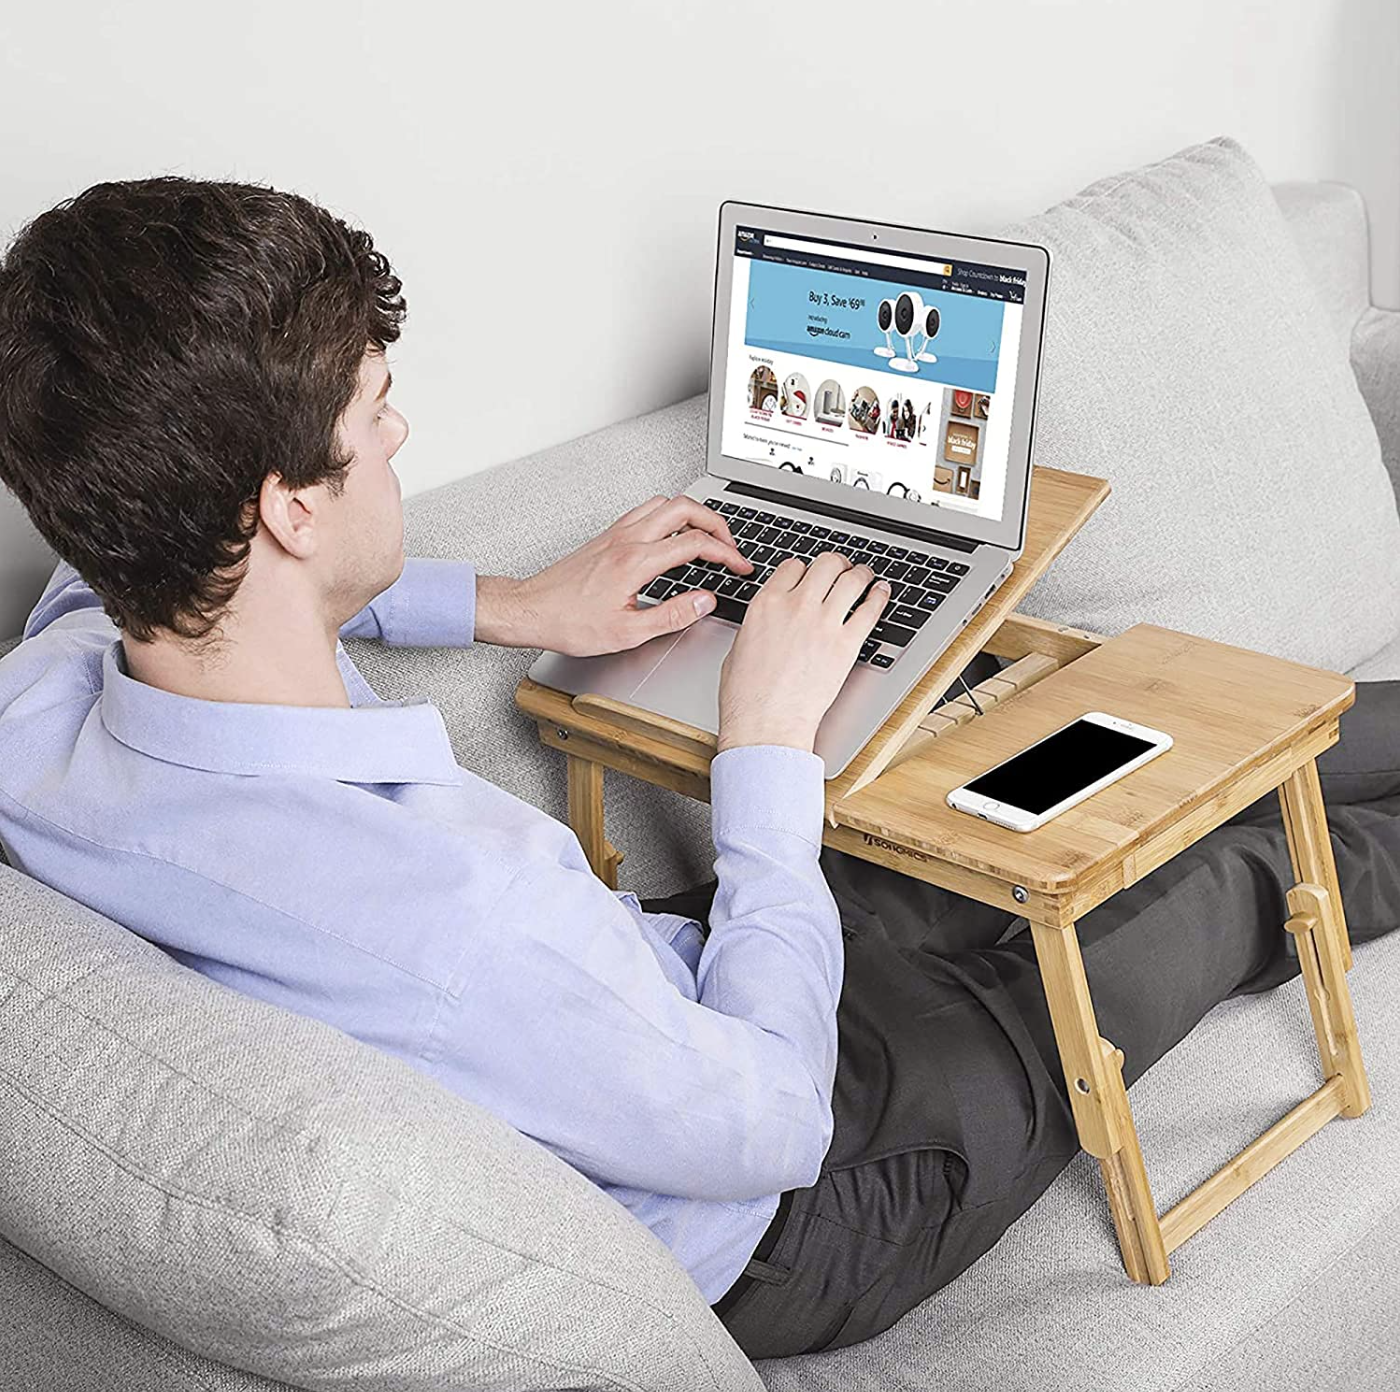 A person is using a caddy to work while lounging on a sofa